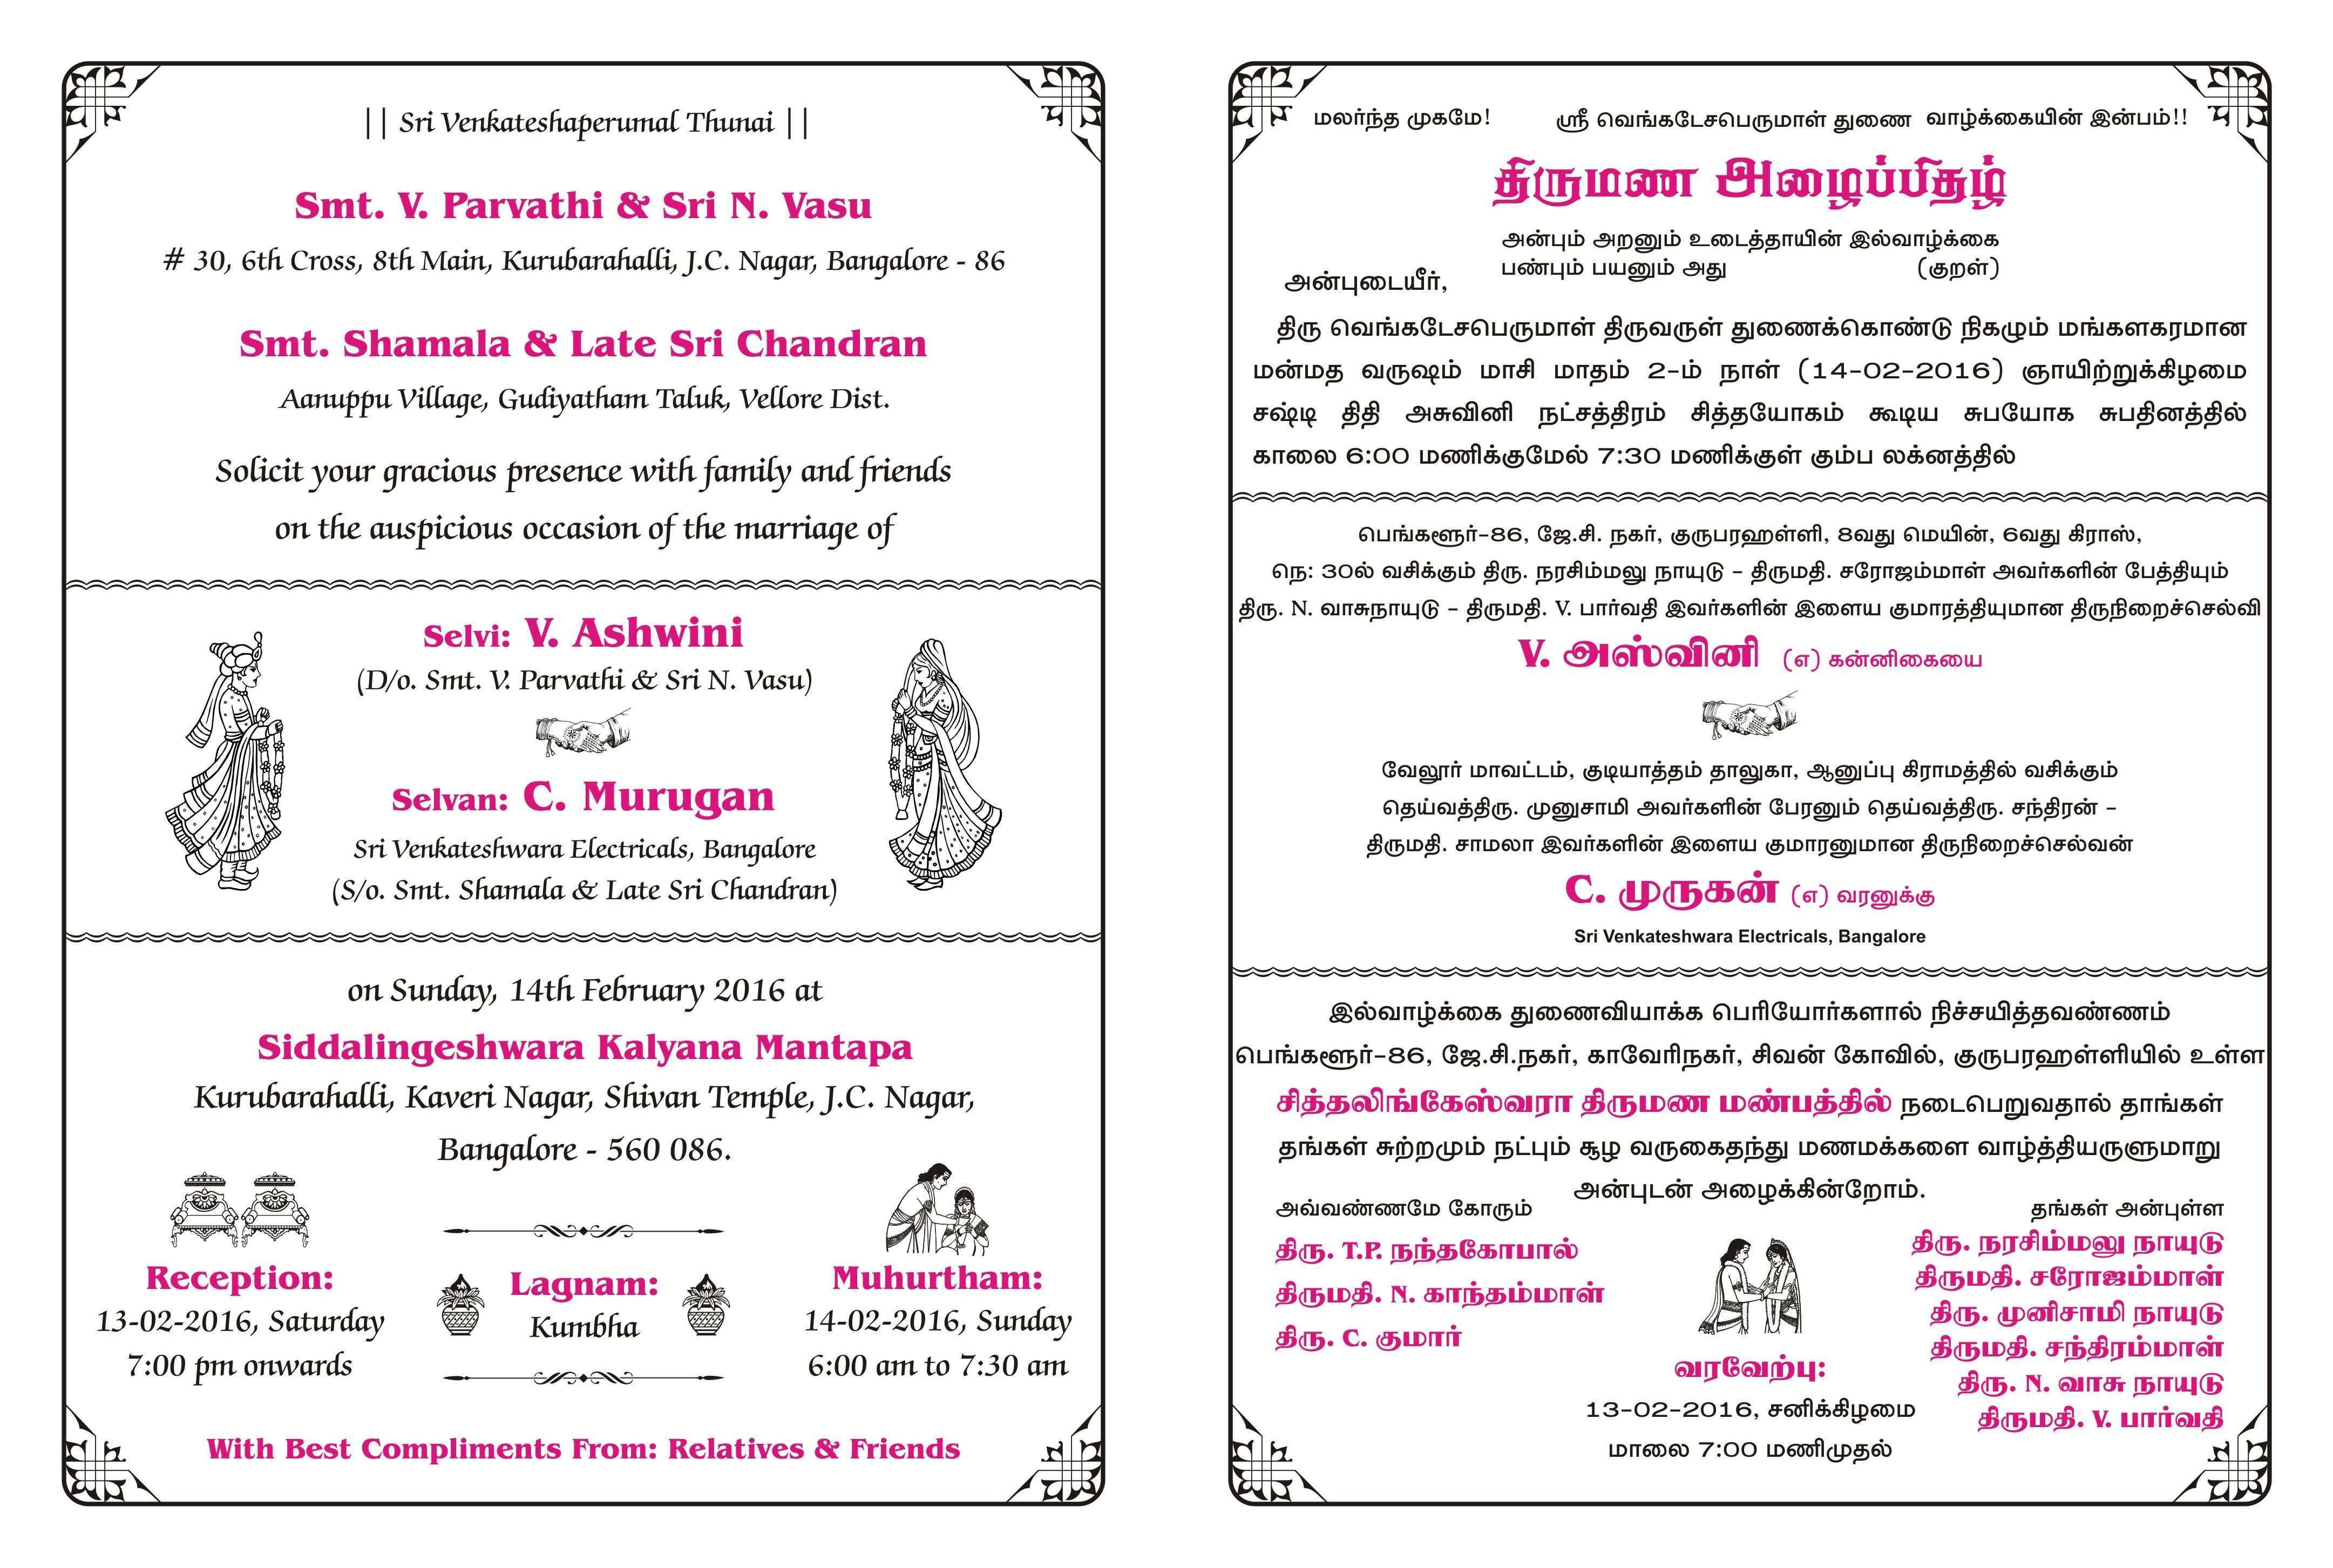 55 Adding Invitation Card Format In Tamil for Ms Word for Invitation Card Format In Tamil